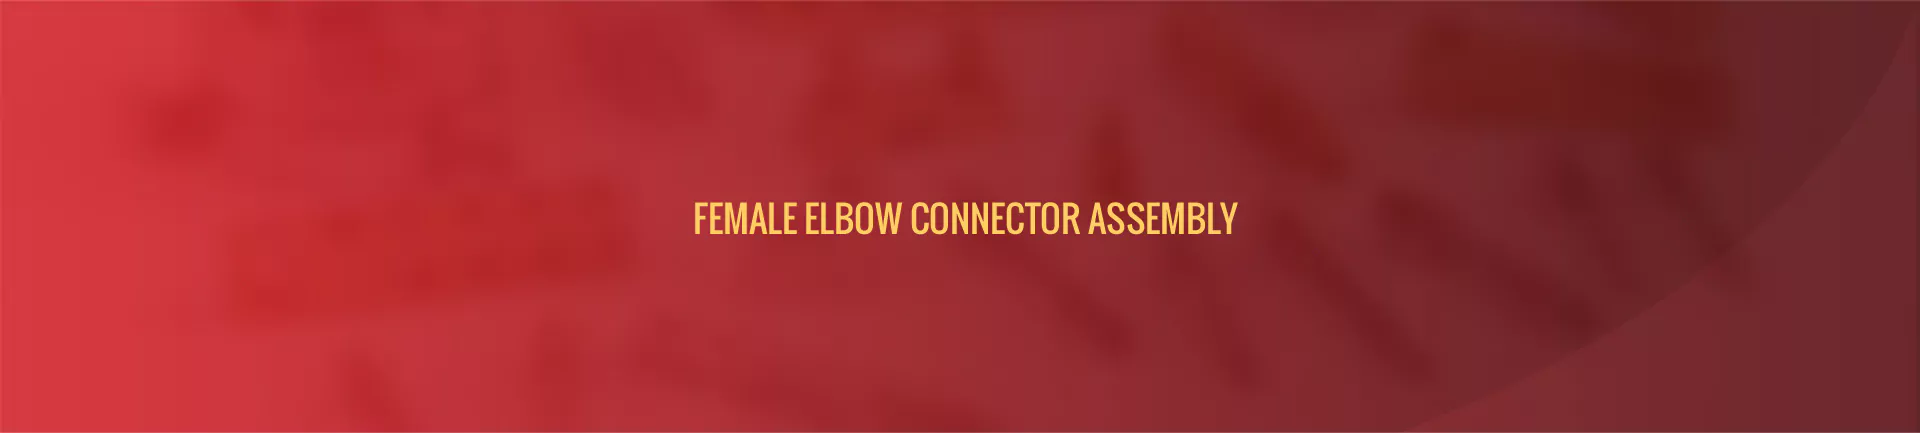 female_elbow_connector_assembly-banner